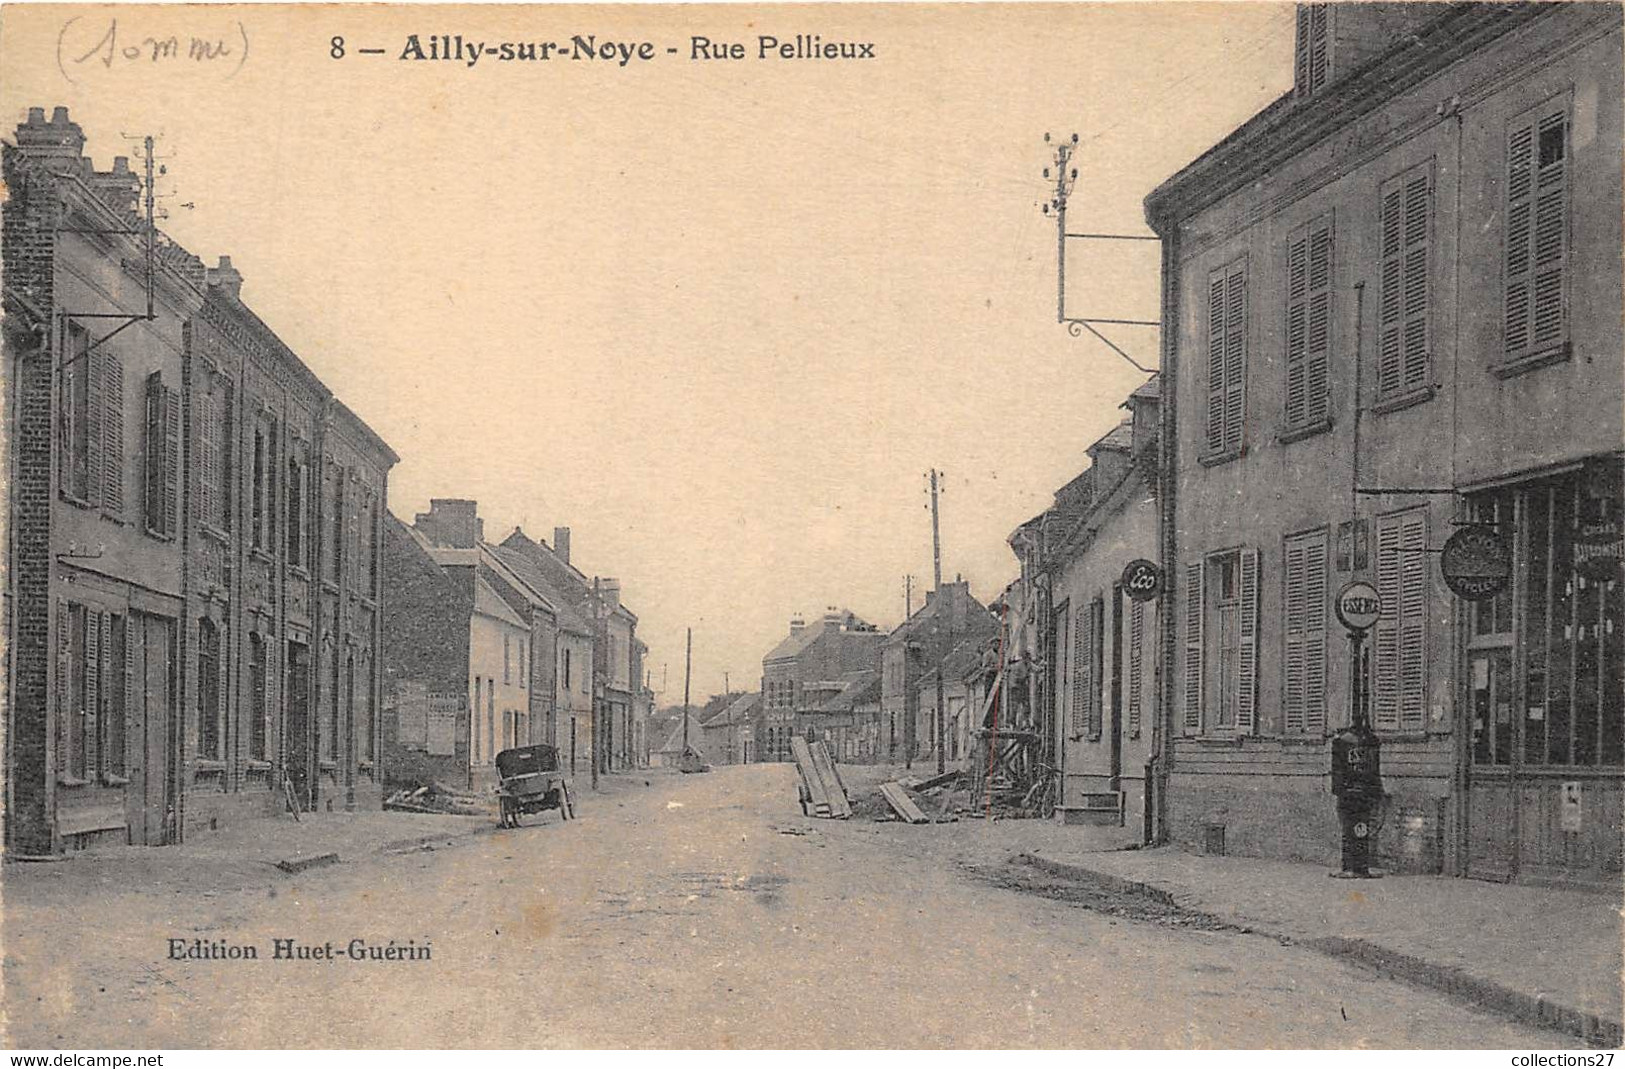 80-AILLY-SUR-NOYE- RUE PELLIEUX - Ailly Sur Noye